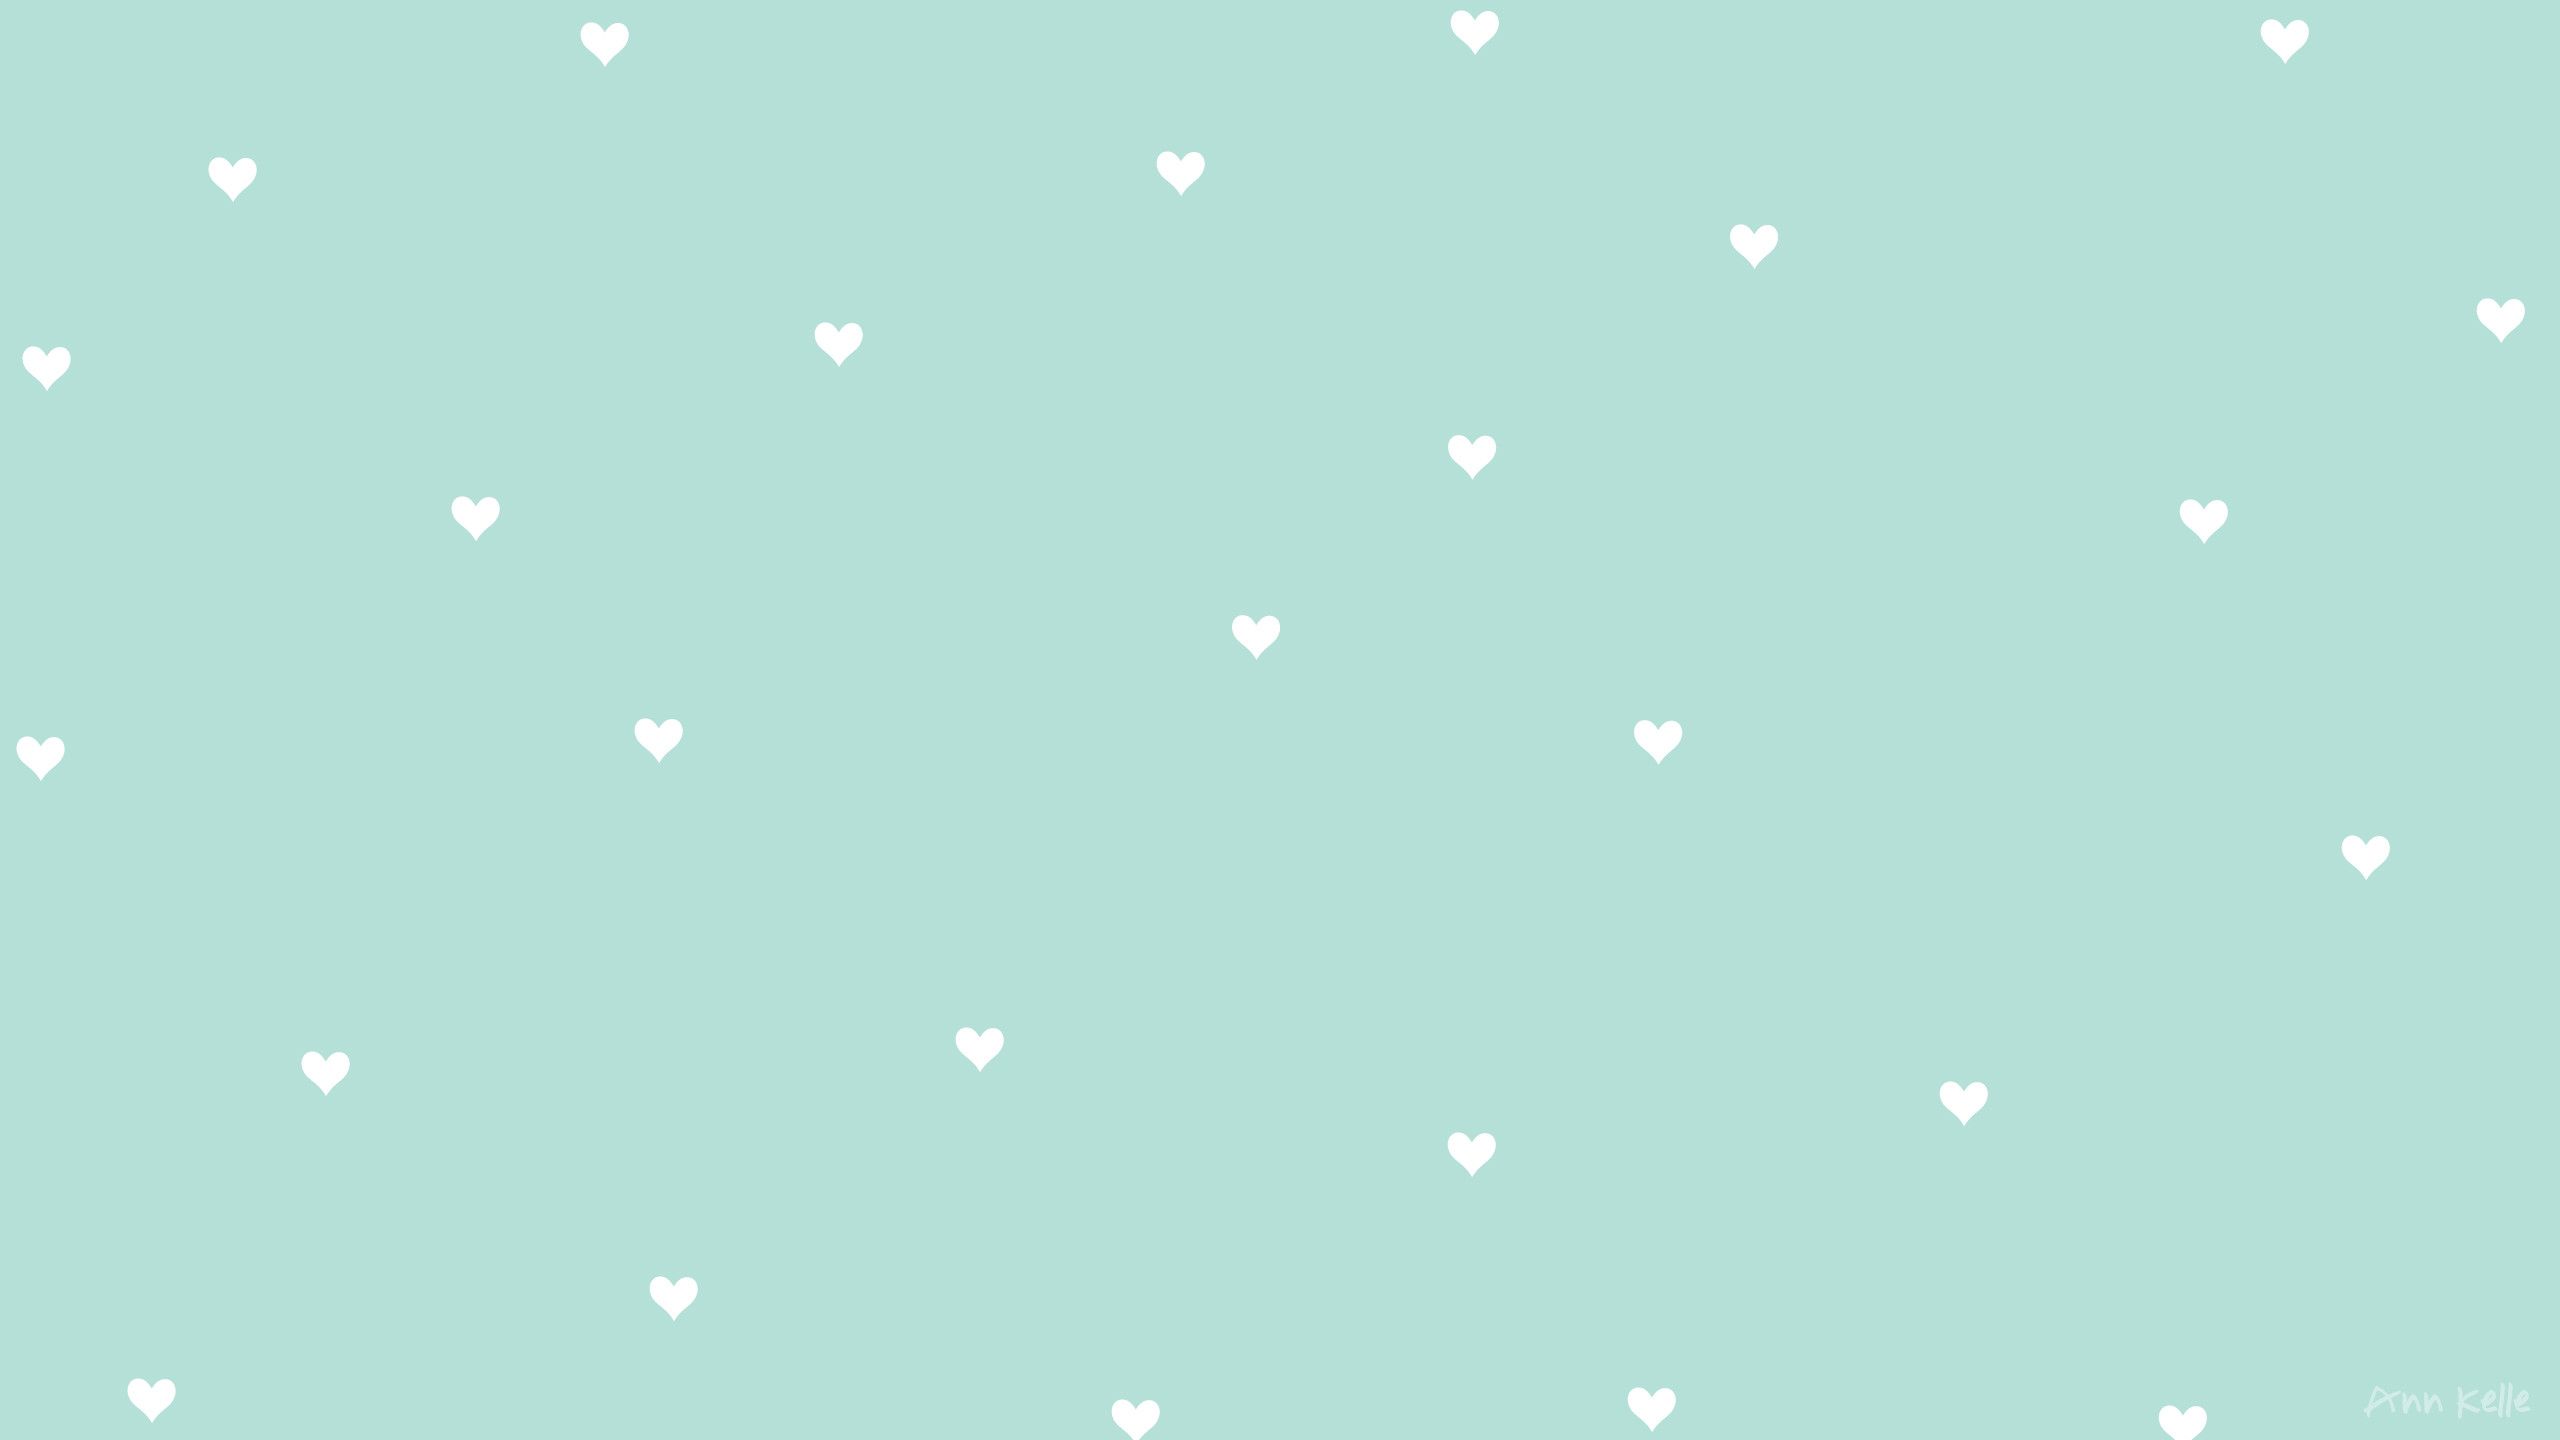 A pattern of white hearts on mint green background - Teal